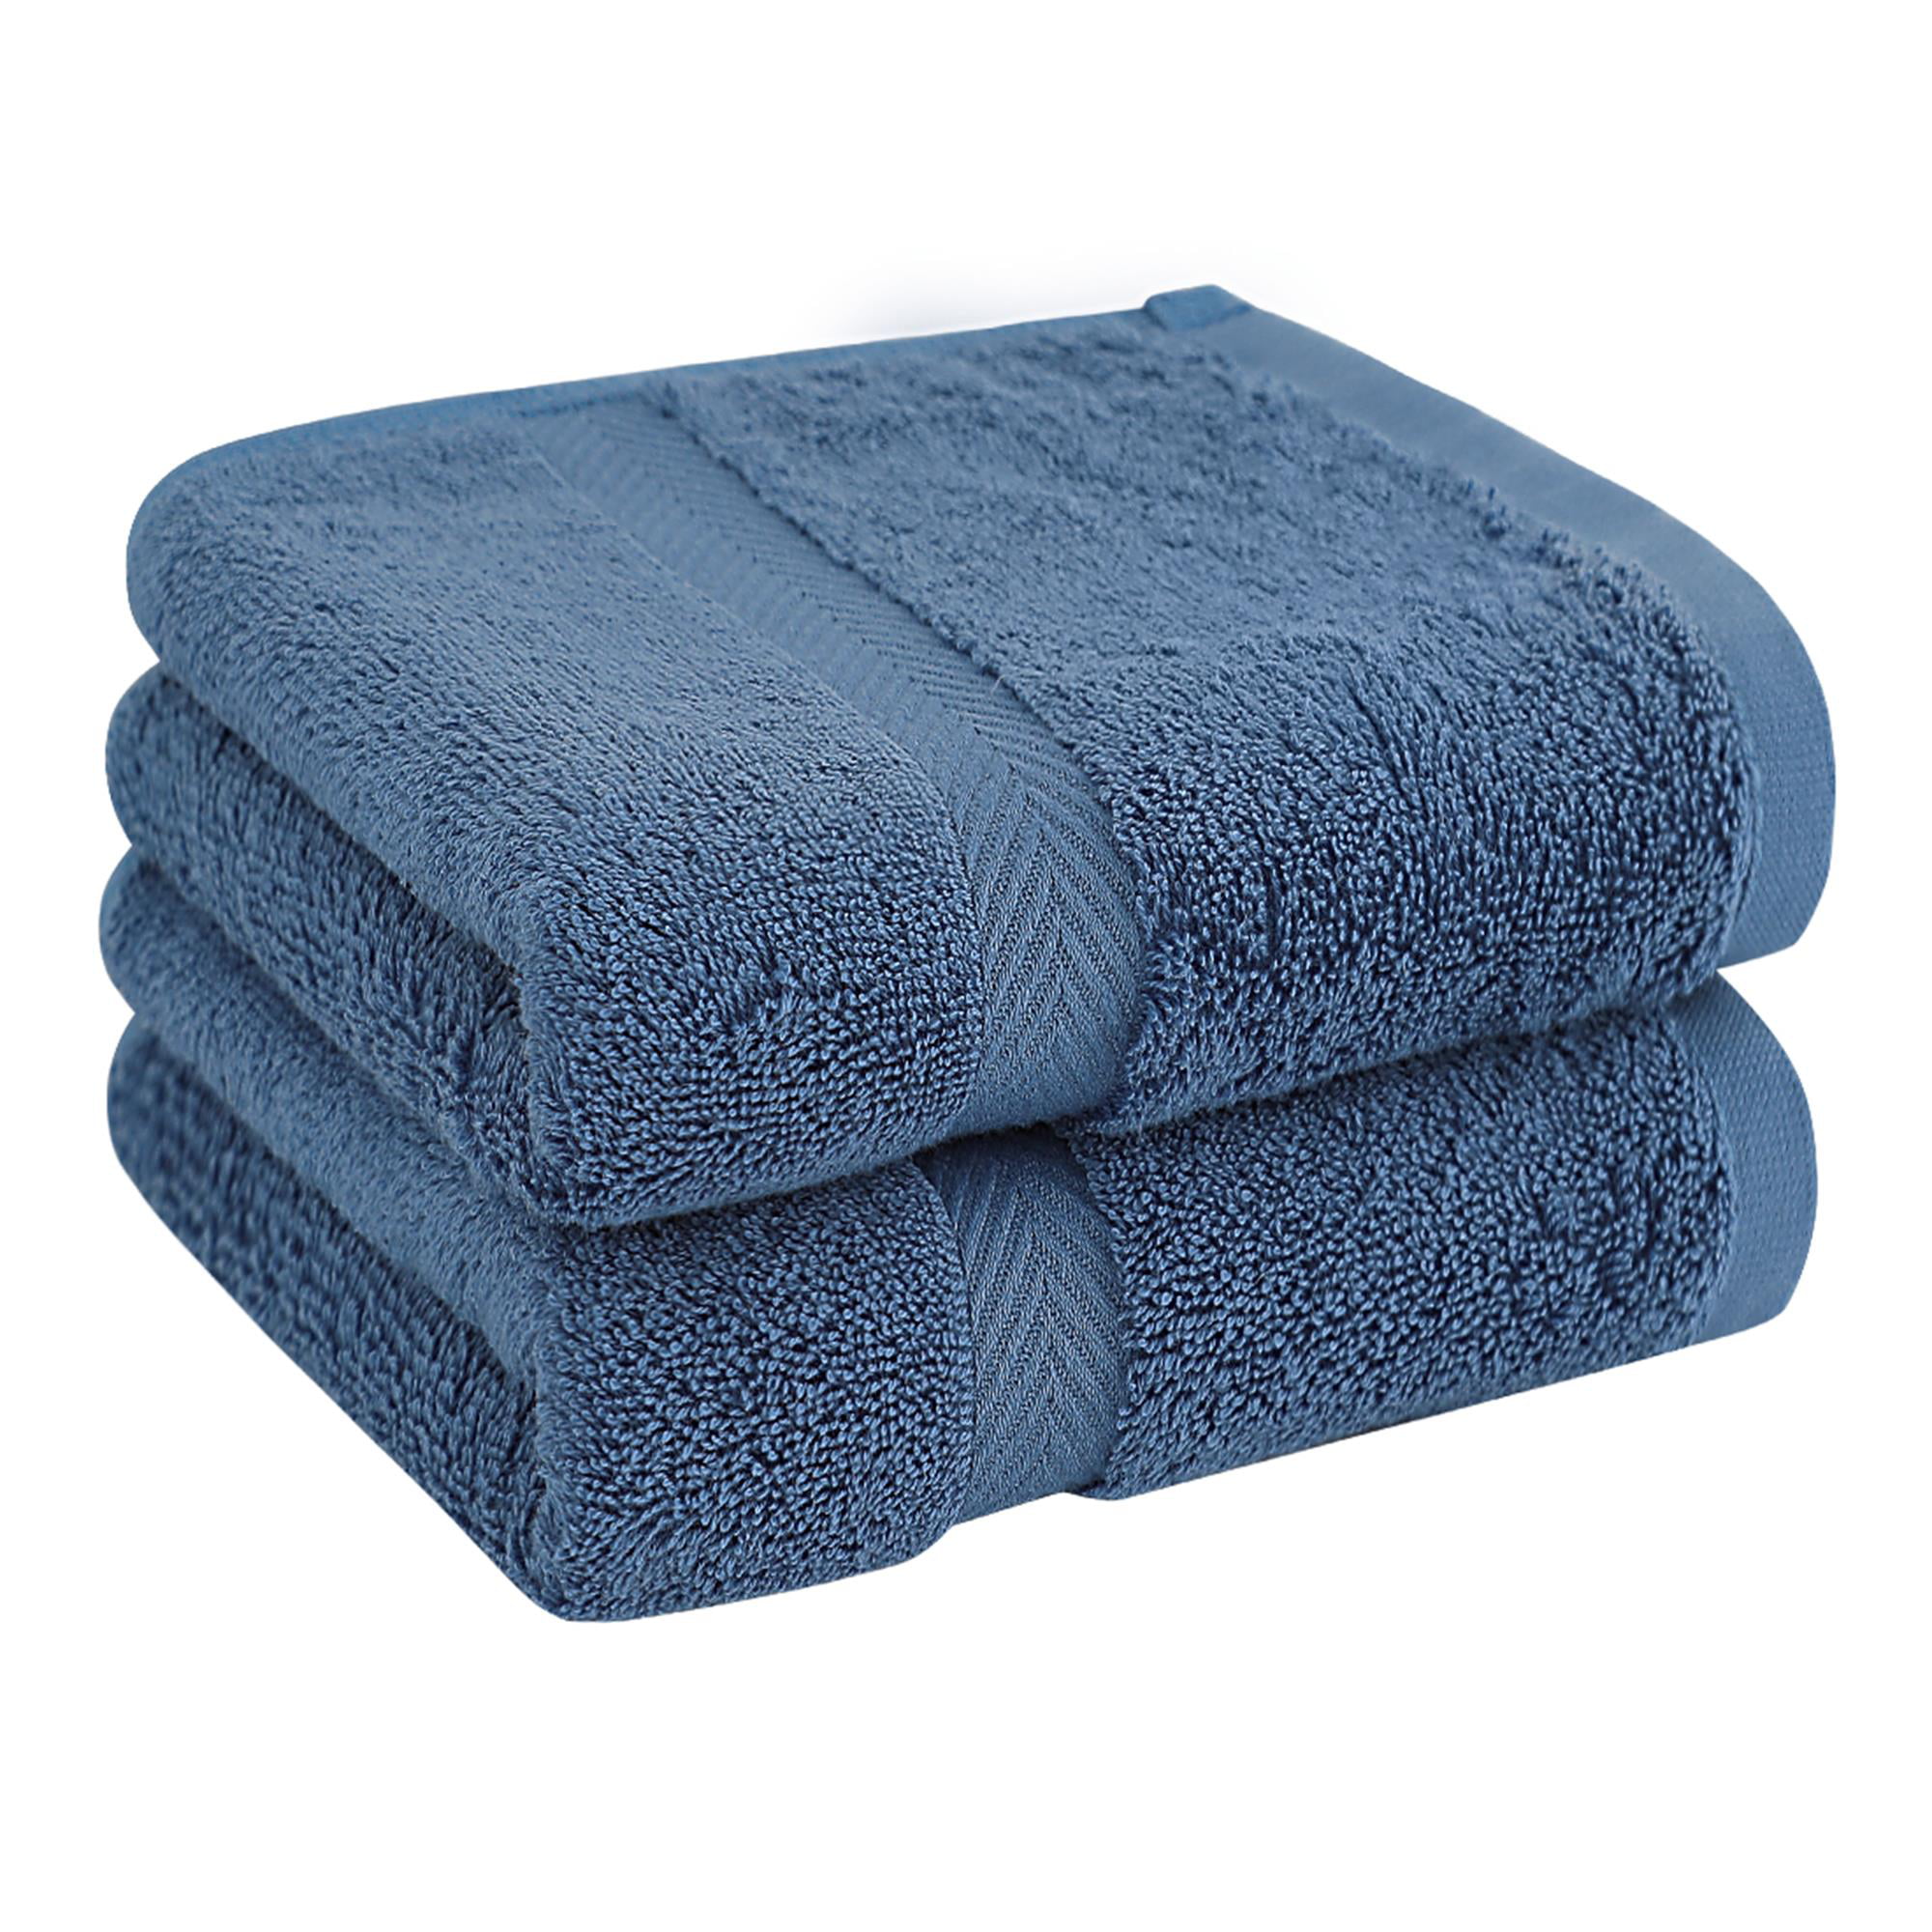 Hotel Quality Navy Blue Bath Sheets 750 gsm 100% Cotton Pack Set of 2 